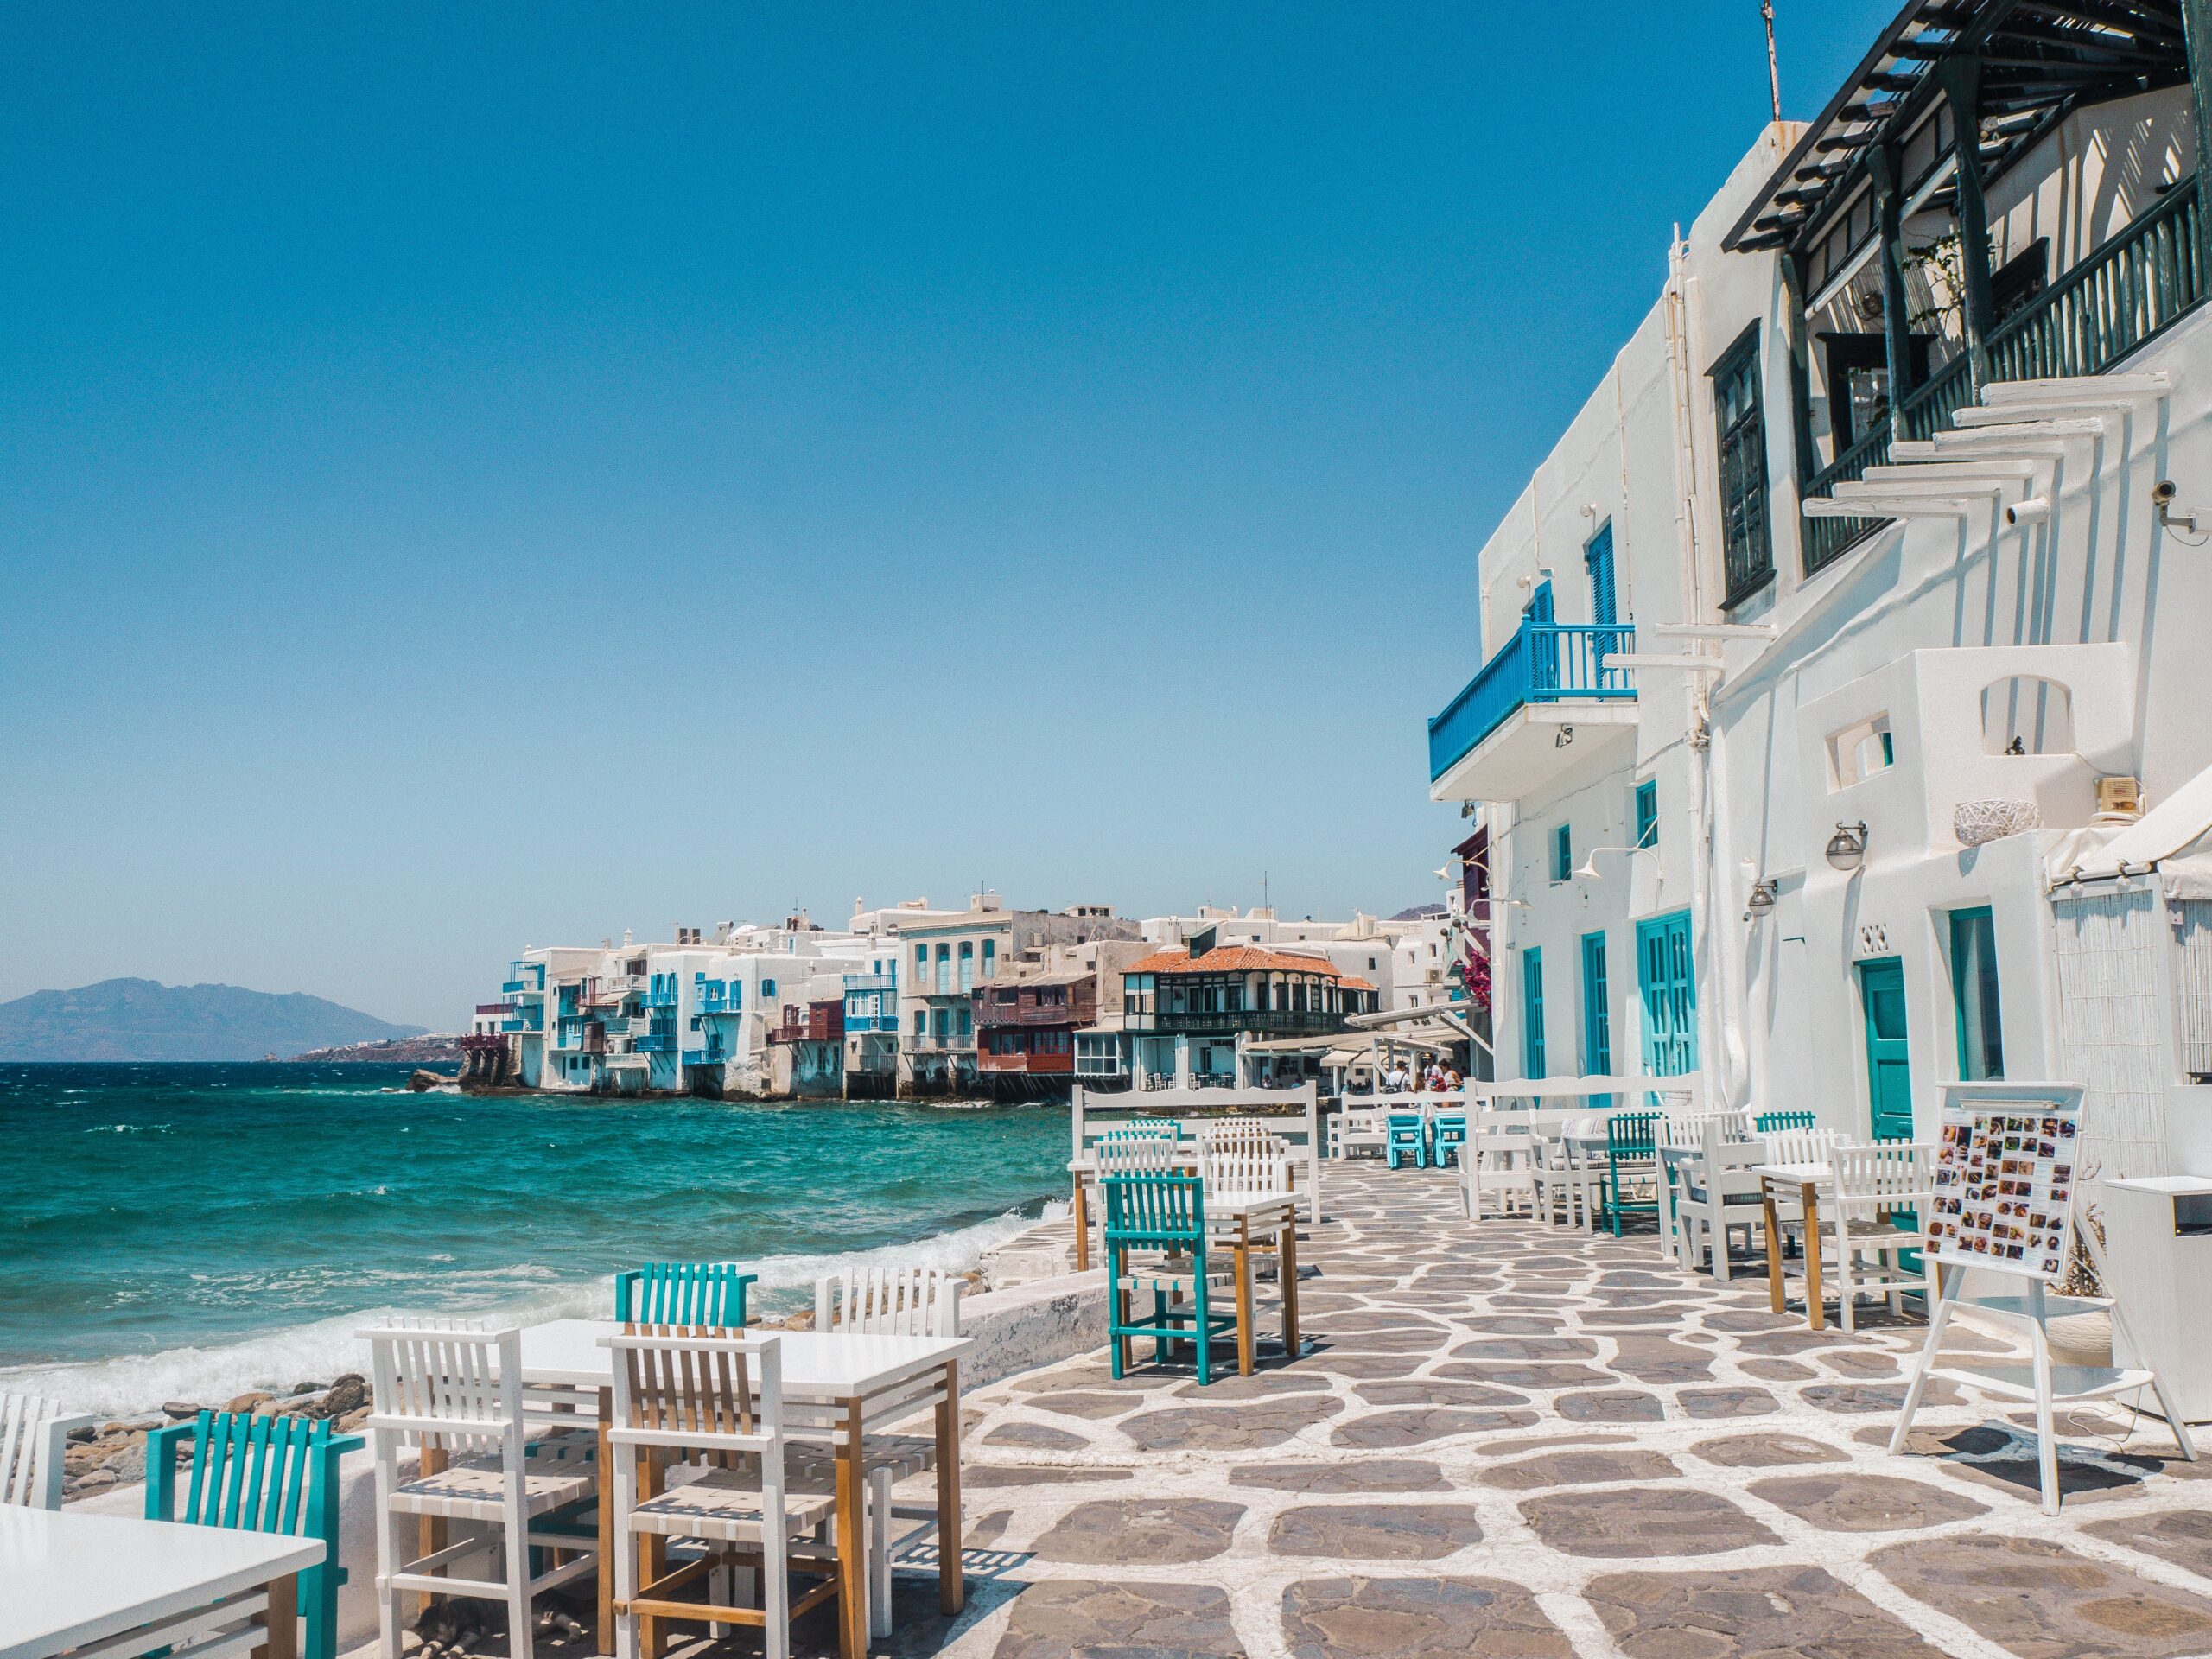 Mykonos wedding venues are amongst the most incredible in the world